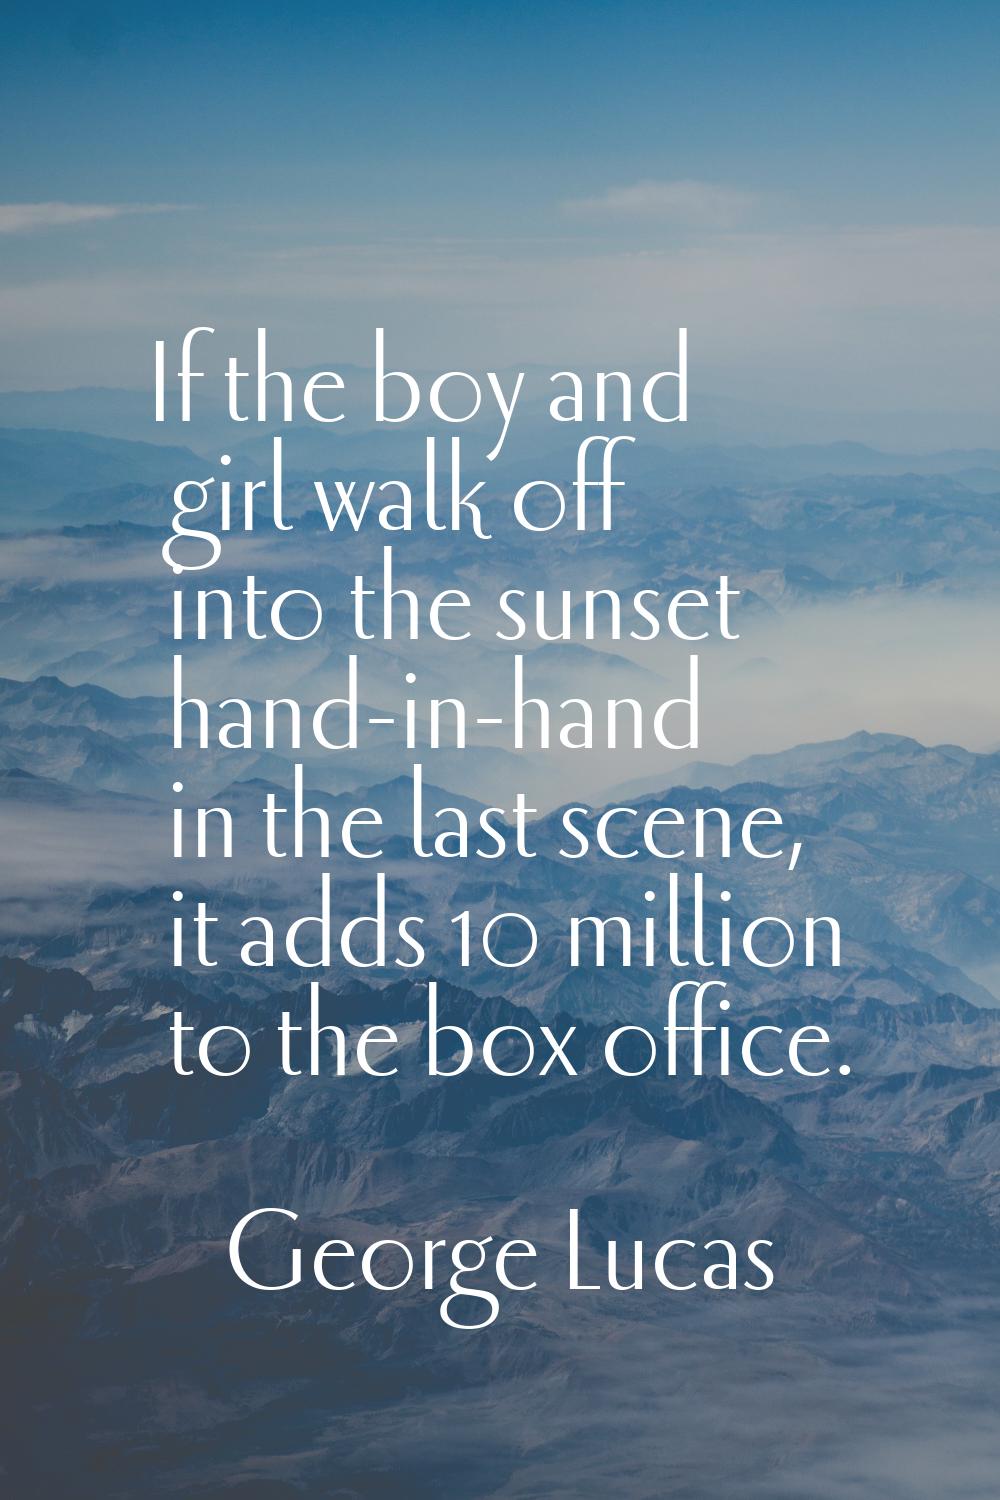 If the boy and girl walk off into the sunset hand-in-hand in the last scene, it adds 10 million to 